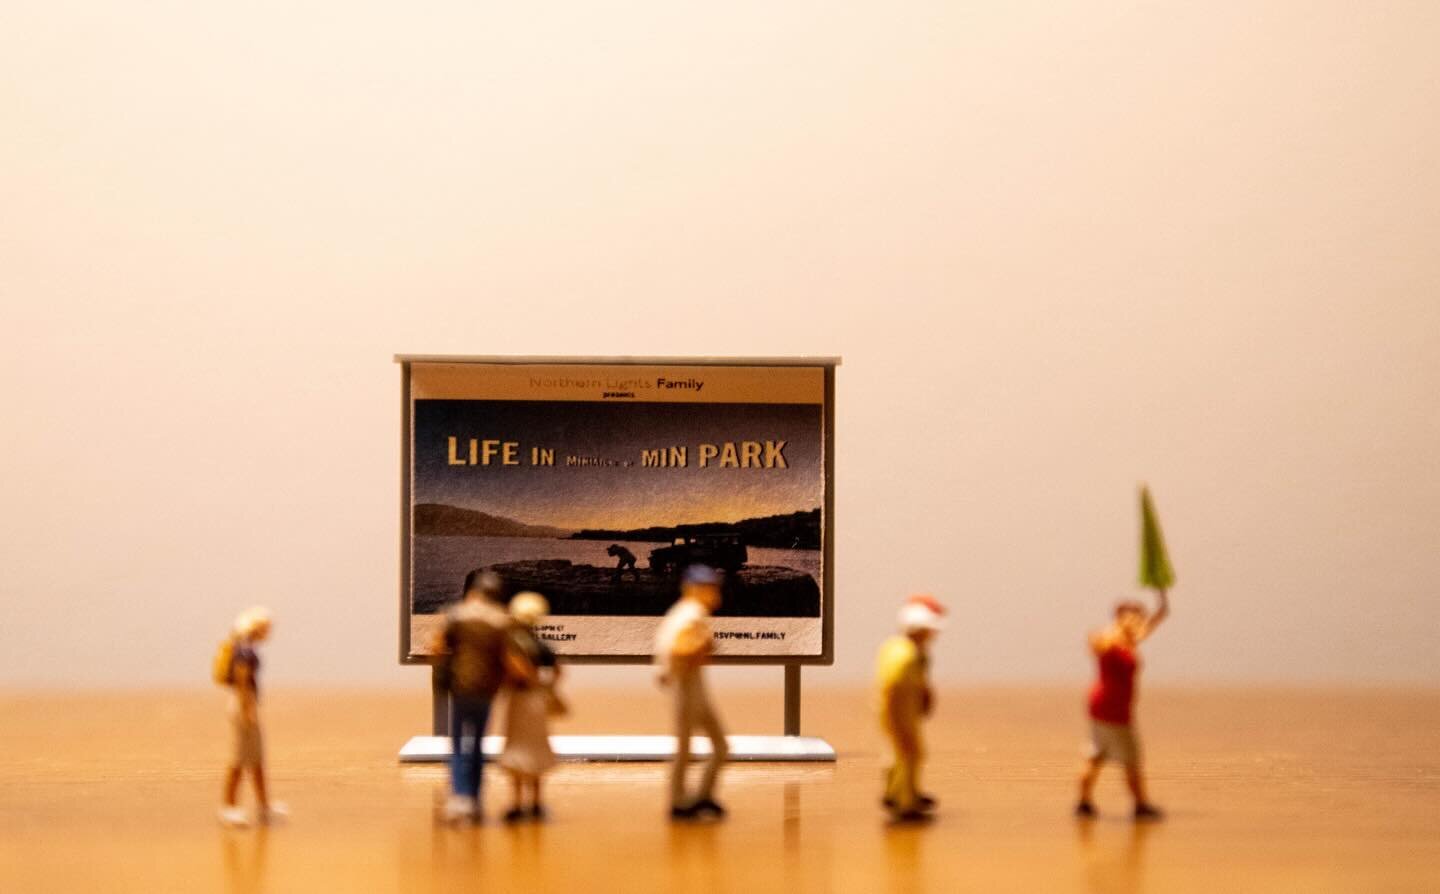 All smiles in NYC last night at our gallery event! The opening reception of &ldquo;Life in Miniature&rdquo;, featuring photographs by BODEGA Sr. Producer Min Park (@lifeinmin), was a huge success. The photographs showcase interesting scenes and elabo